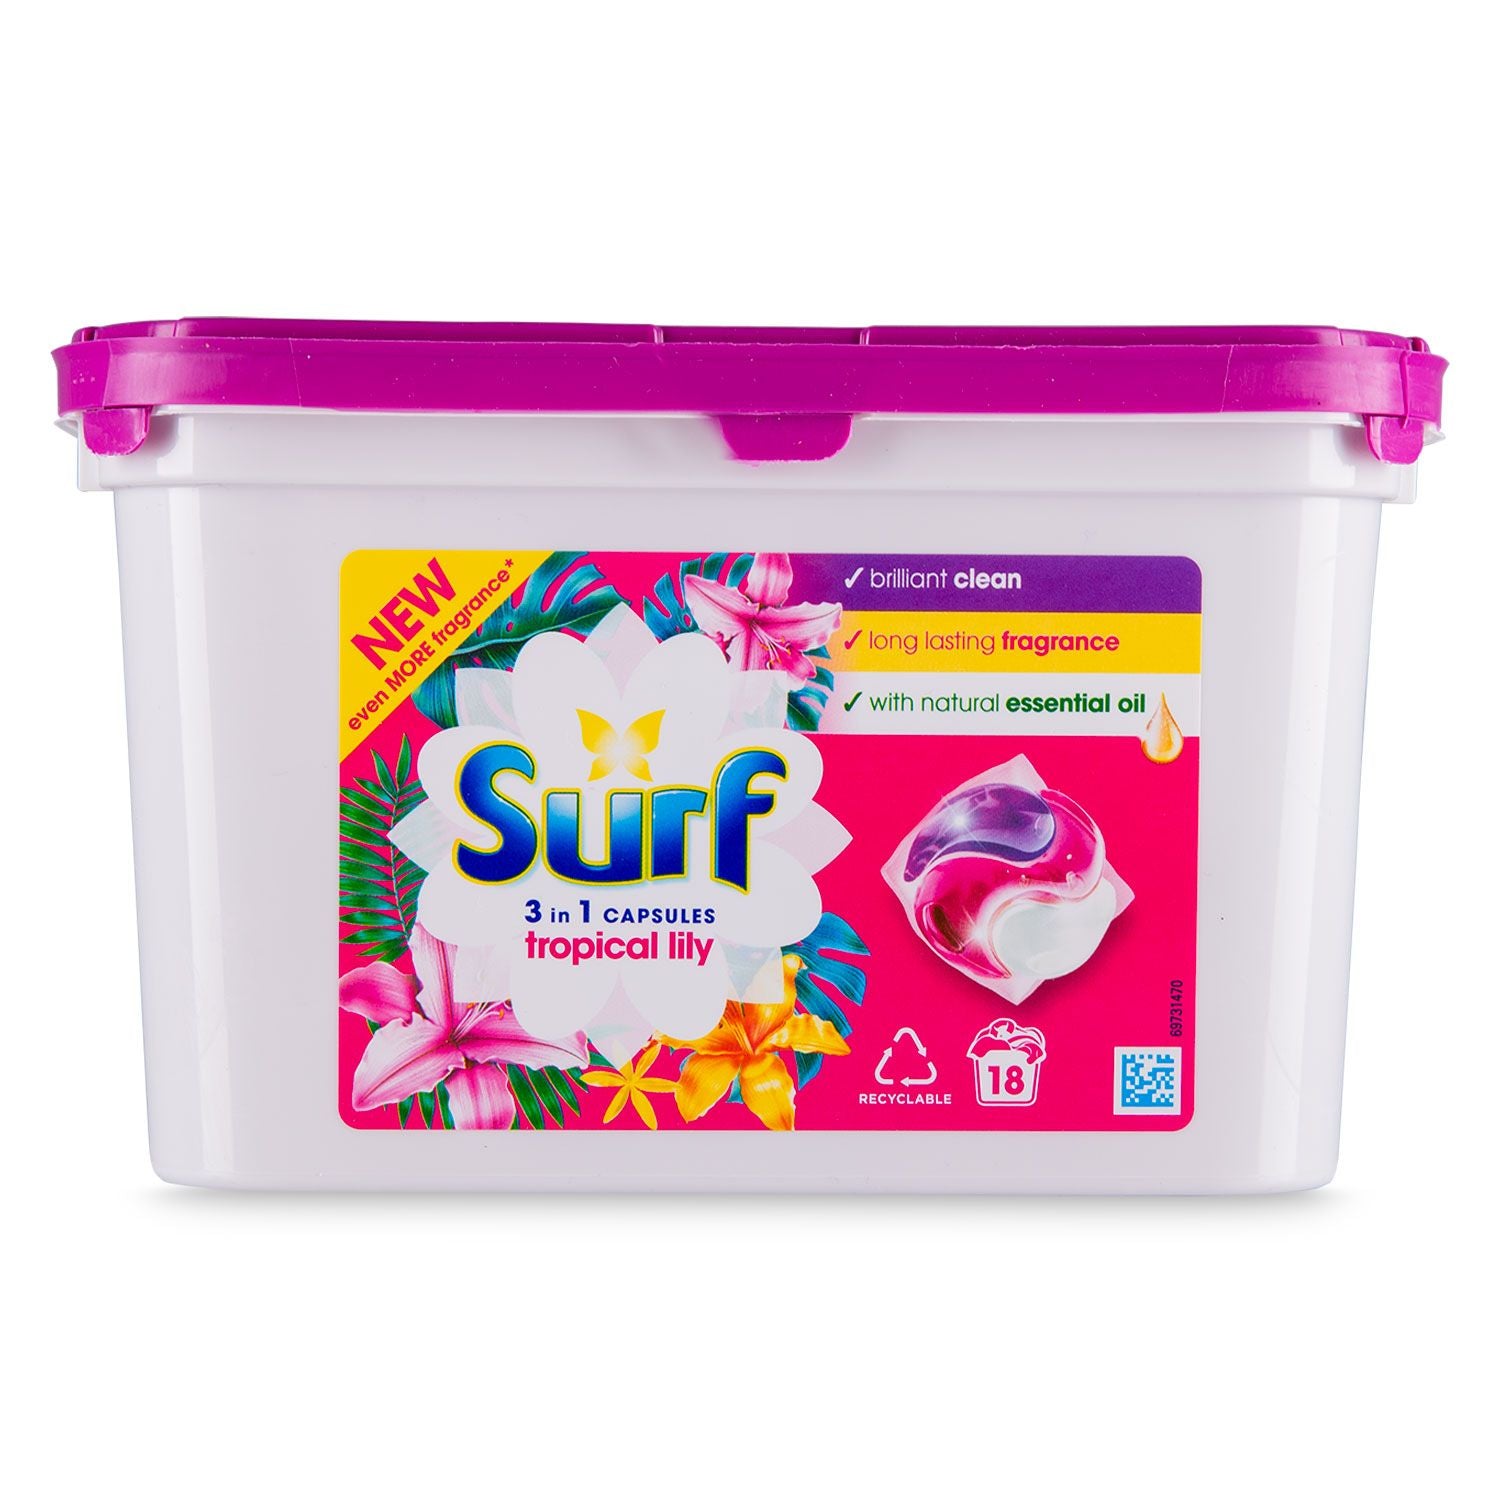 Surf 3in1 Capsules Tropical Lily